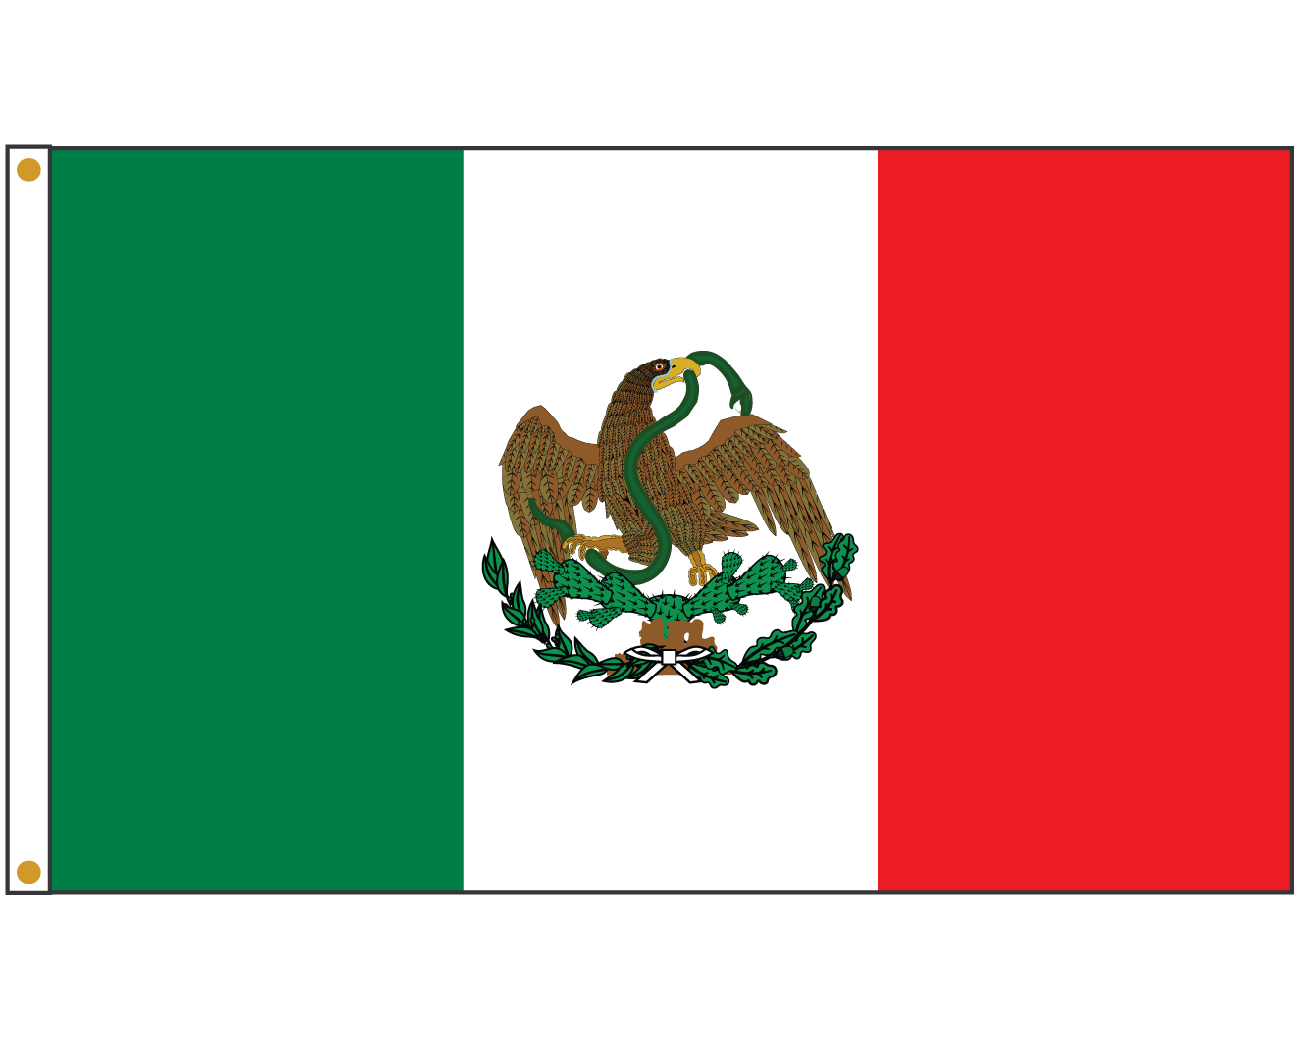 Mexico x flags north. Country clipart country flag